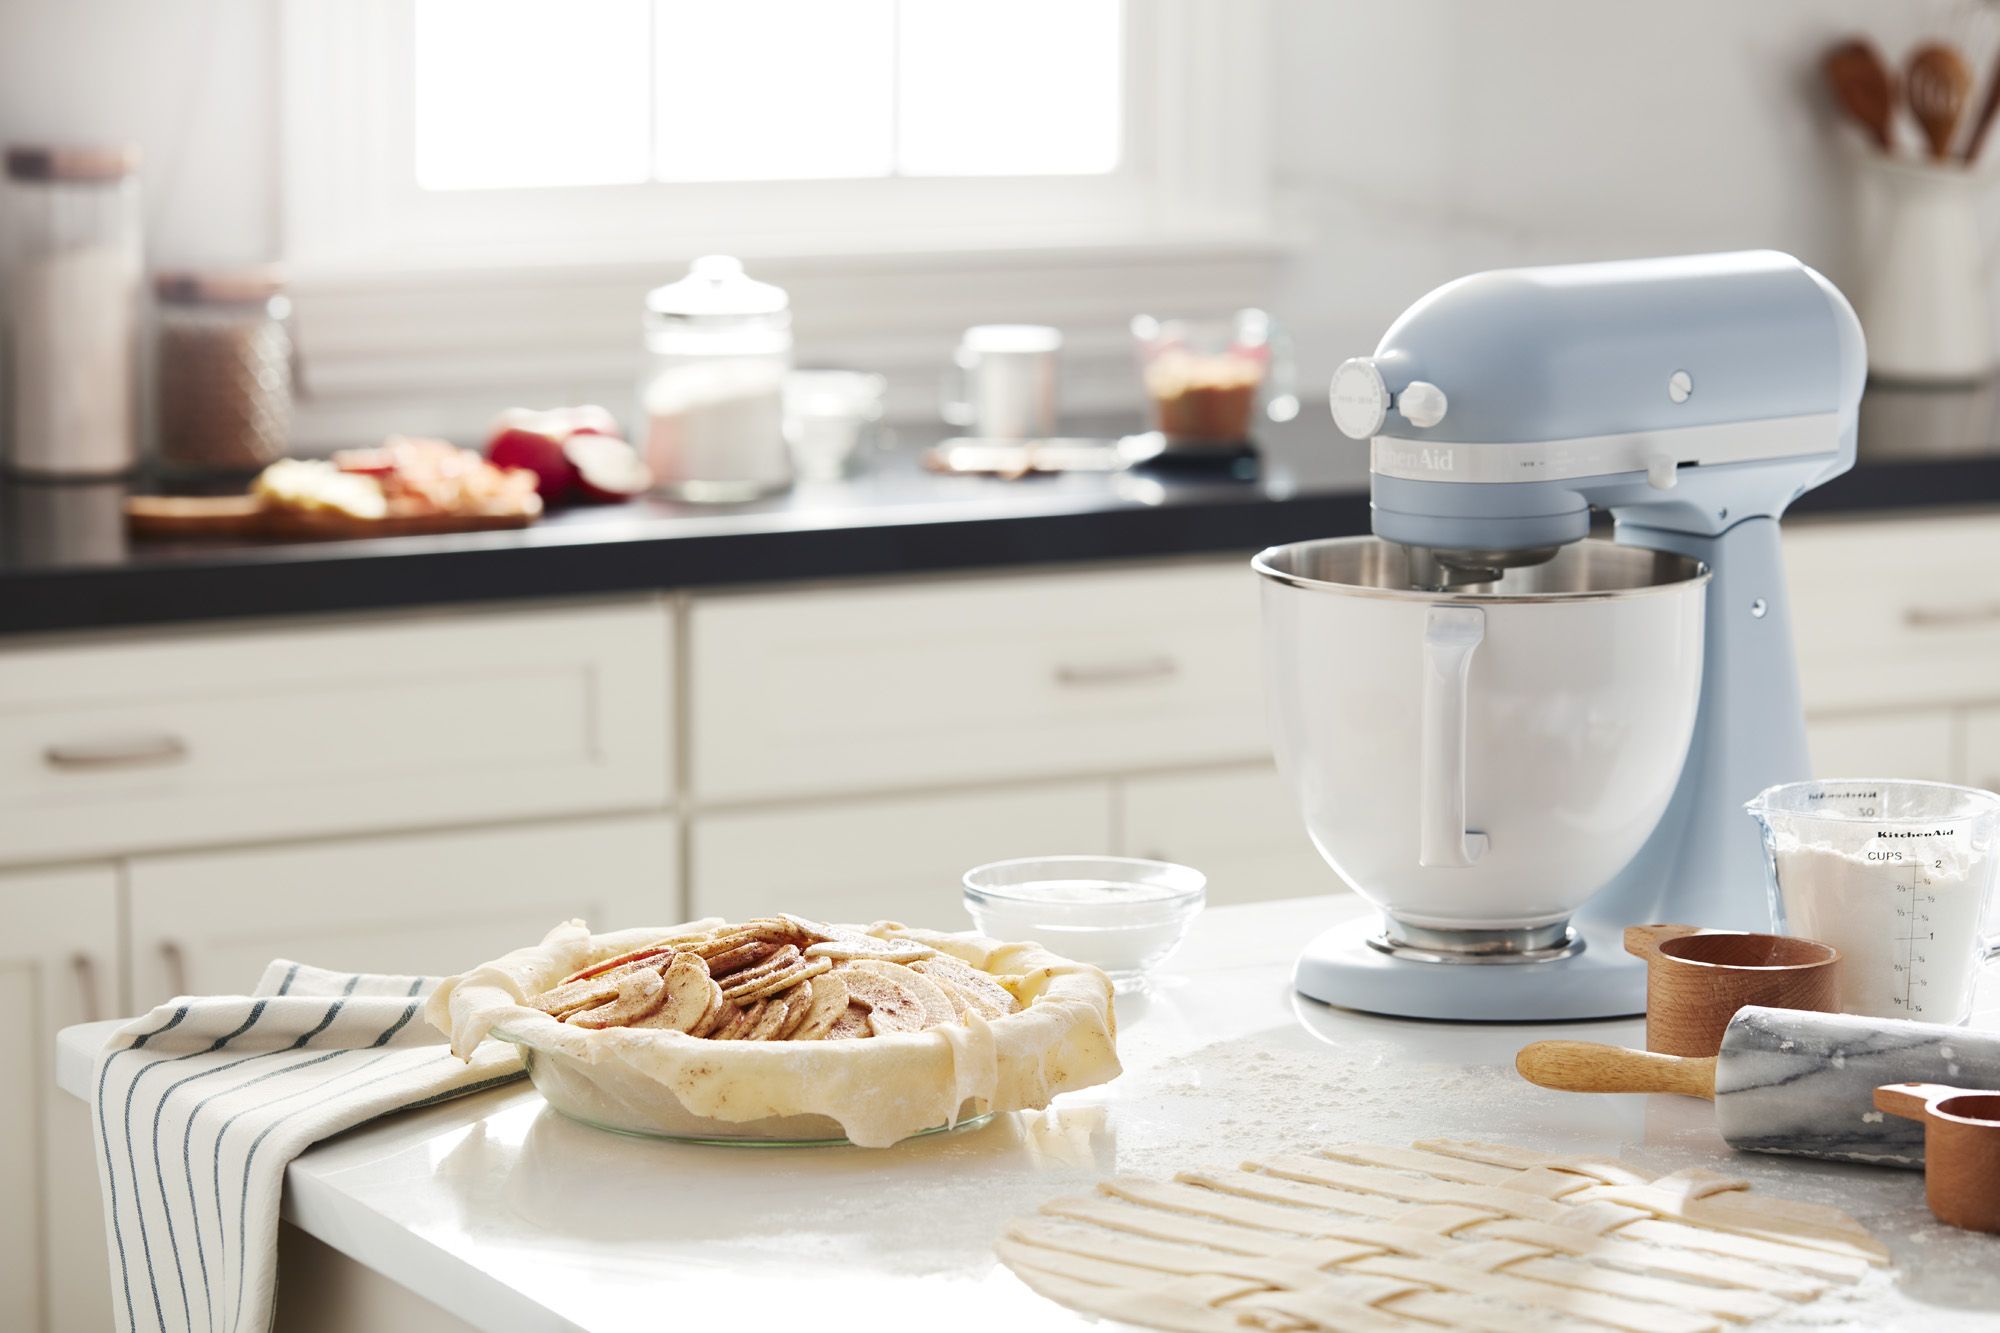 KitchenAid's stand mixer rocks a new color—Misty Blue - Reviewed